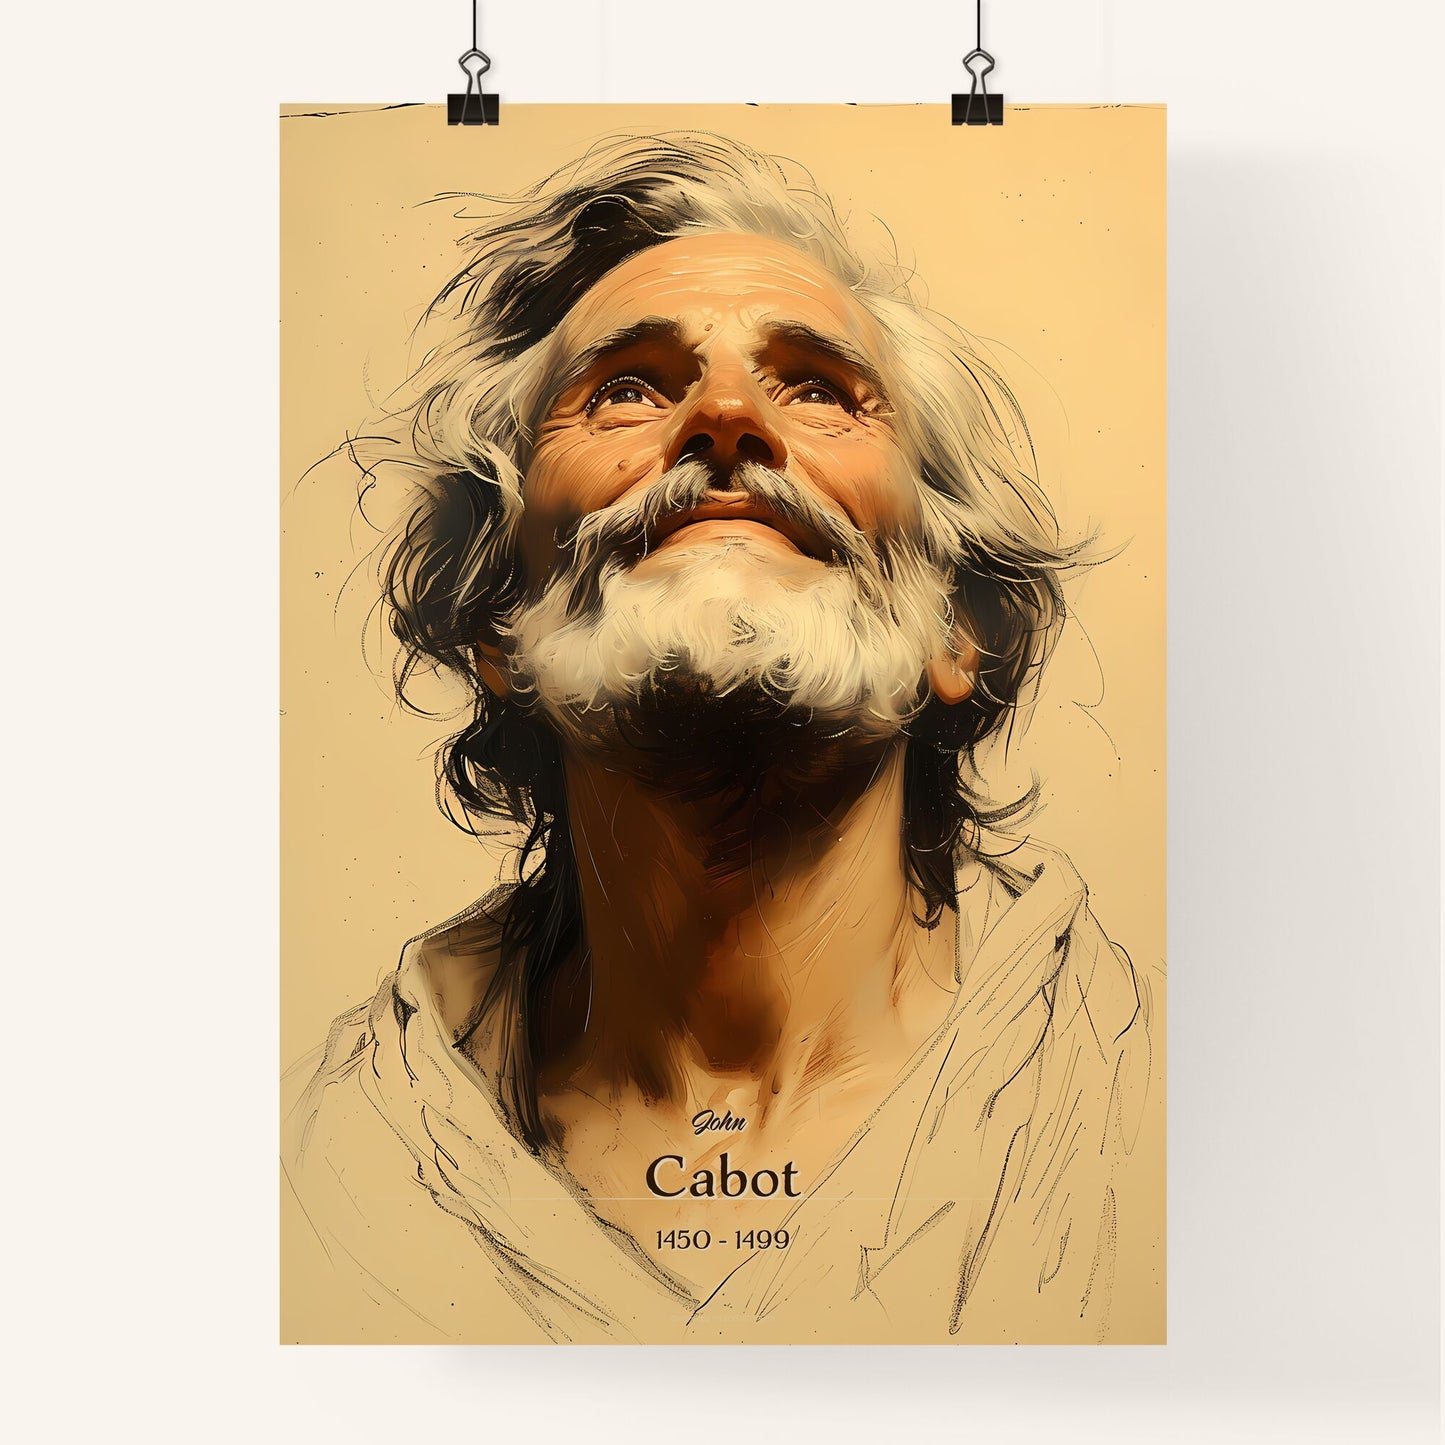 John, Cabot, 1450 - 1499, A Poster of a man looking up to the sky Default Title